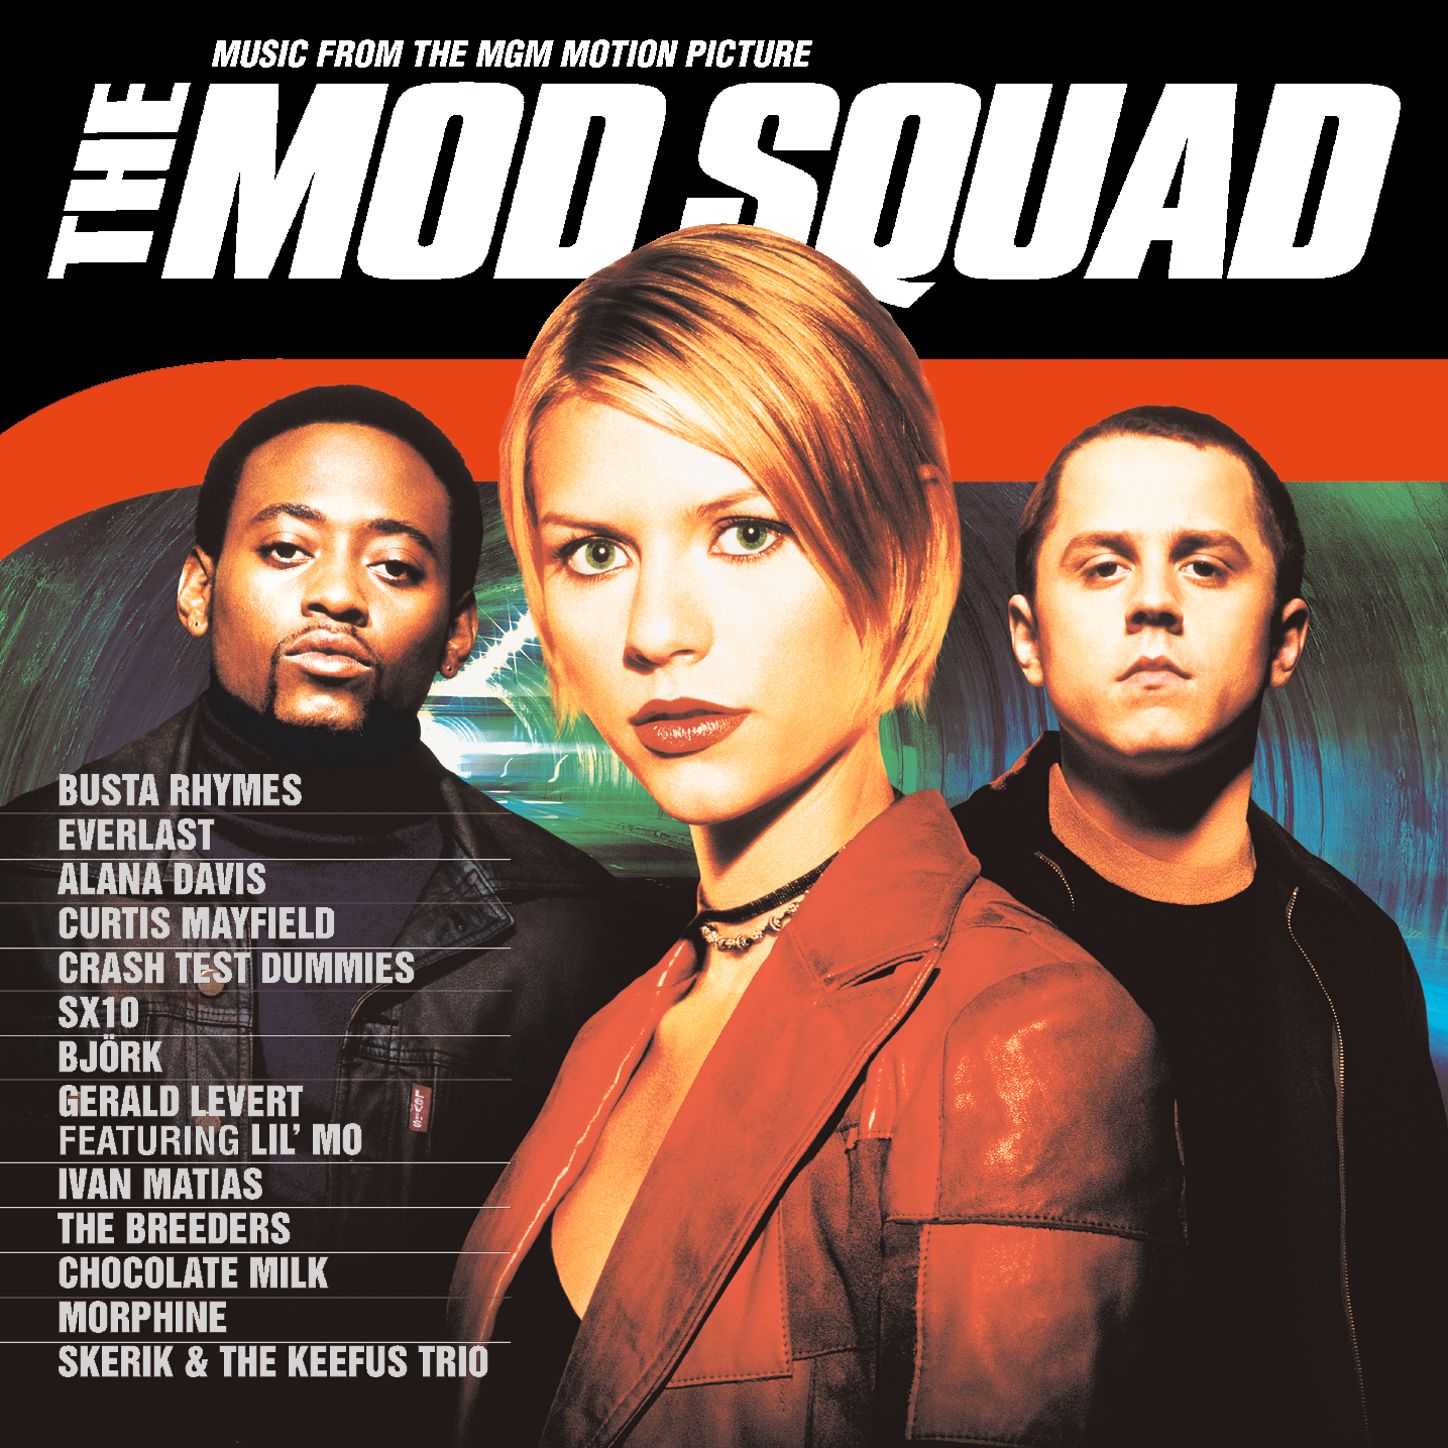 The Mod Squad (Music from the MGM Motion Picture)